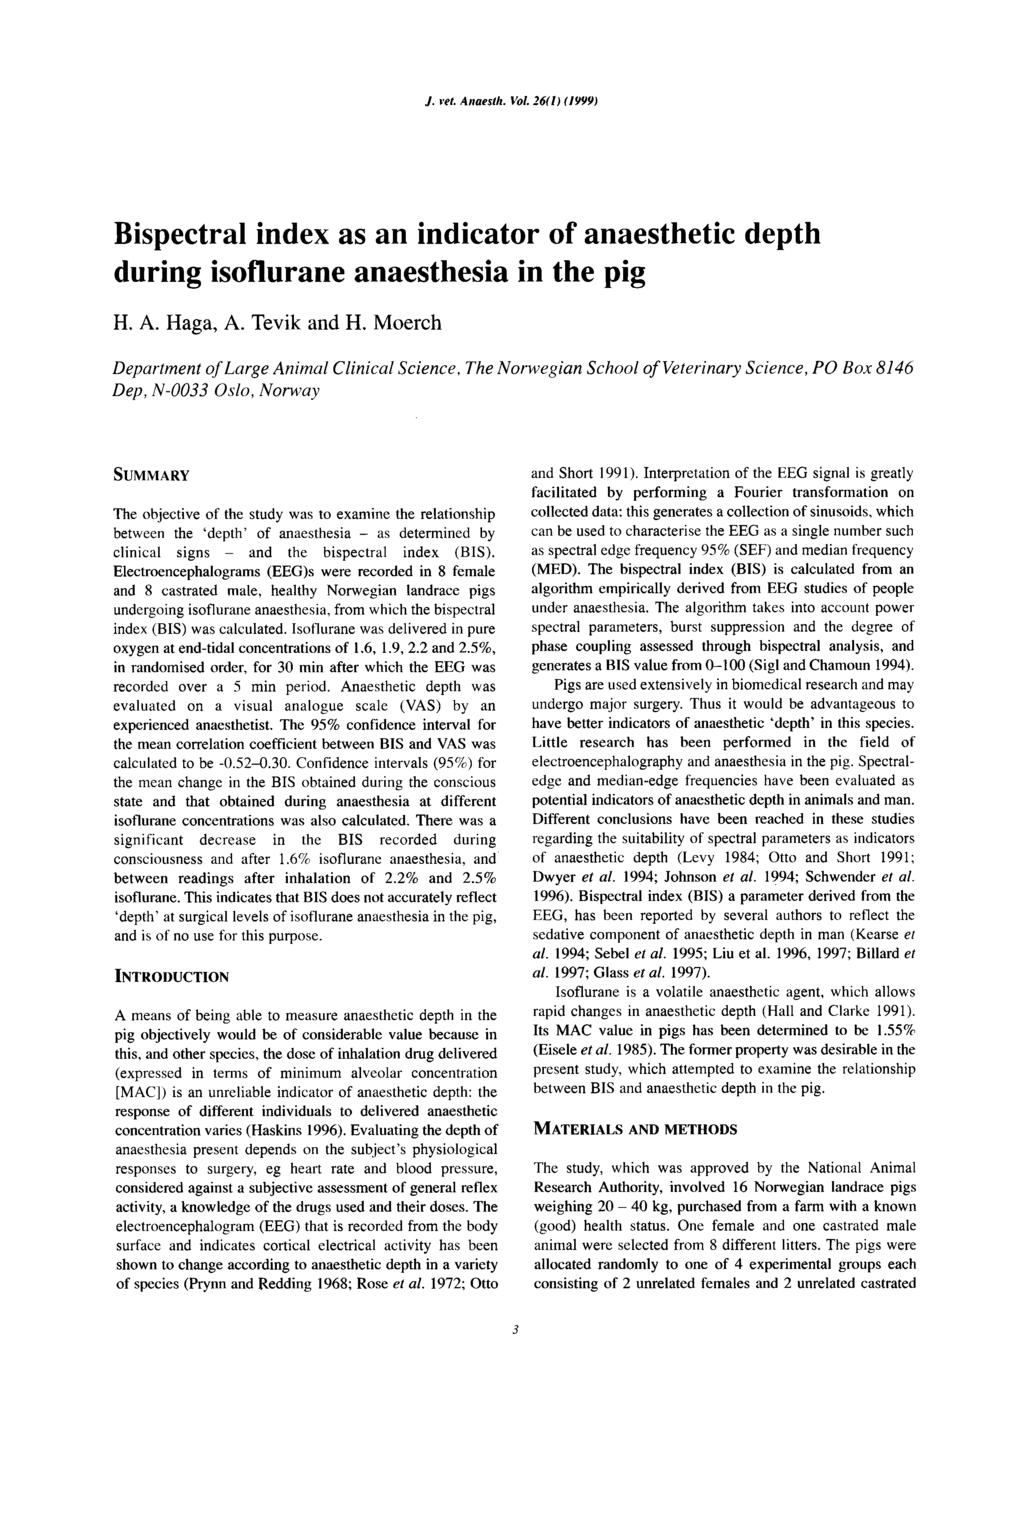 J. vet. Anaesth. Vol. 2{[) (/999) Bispectral index as an indicator of anaesthetic depth during isoflurane anaesthesia in the pig H. A. Haga, A. Tevik and H.